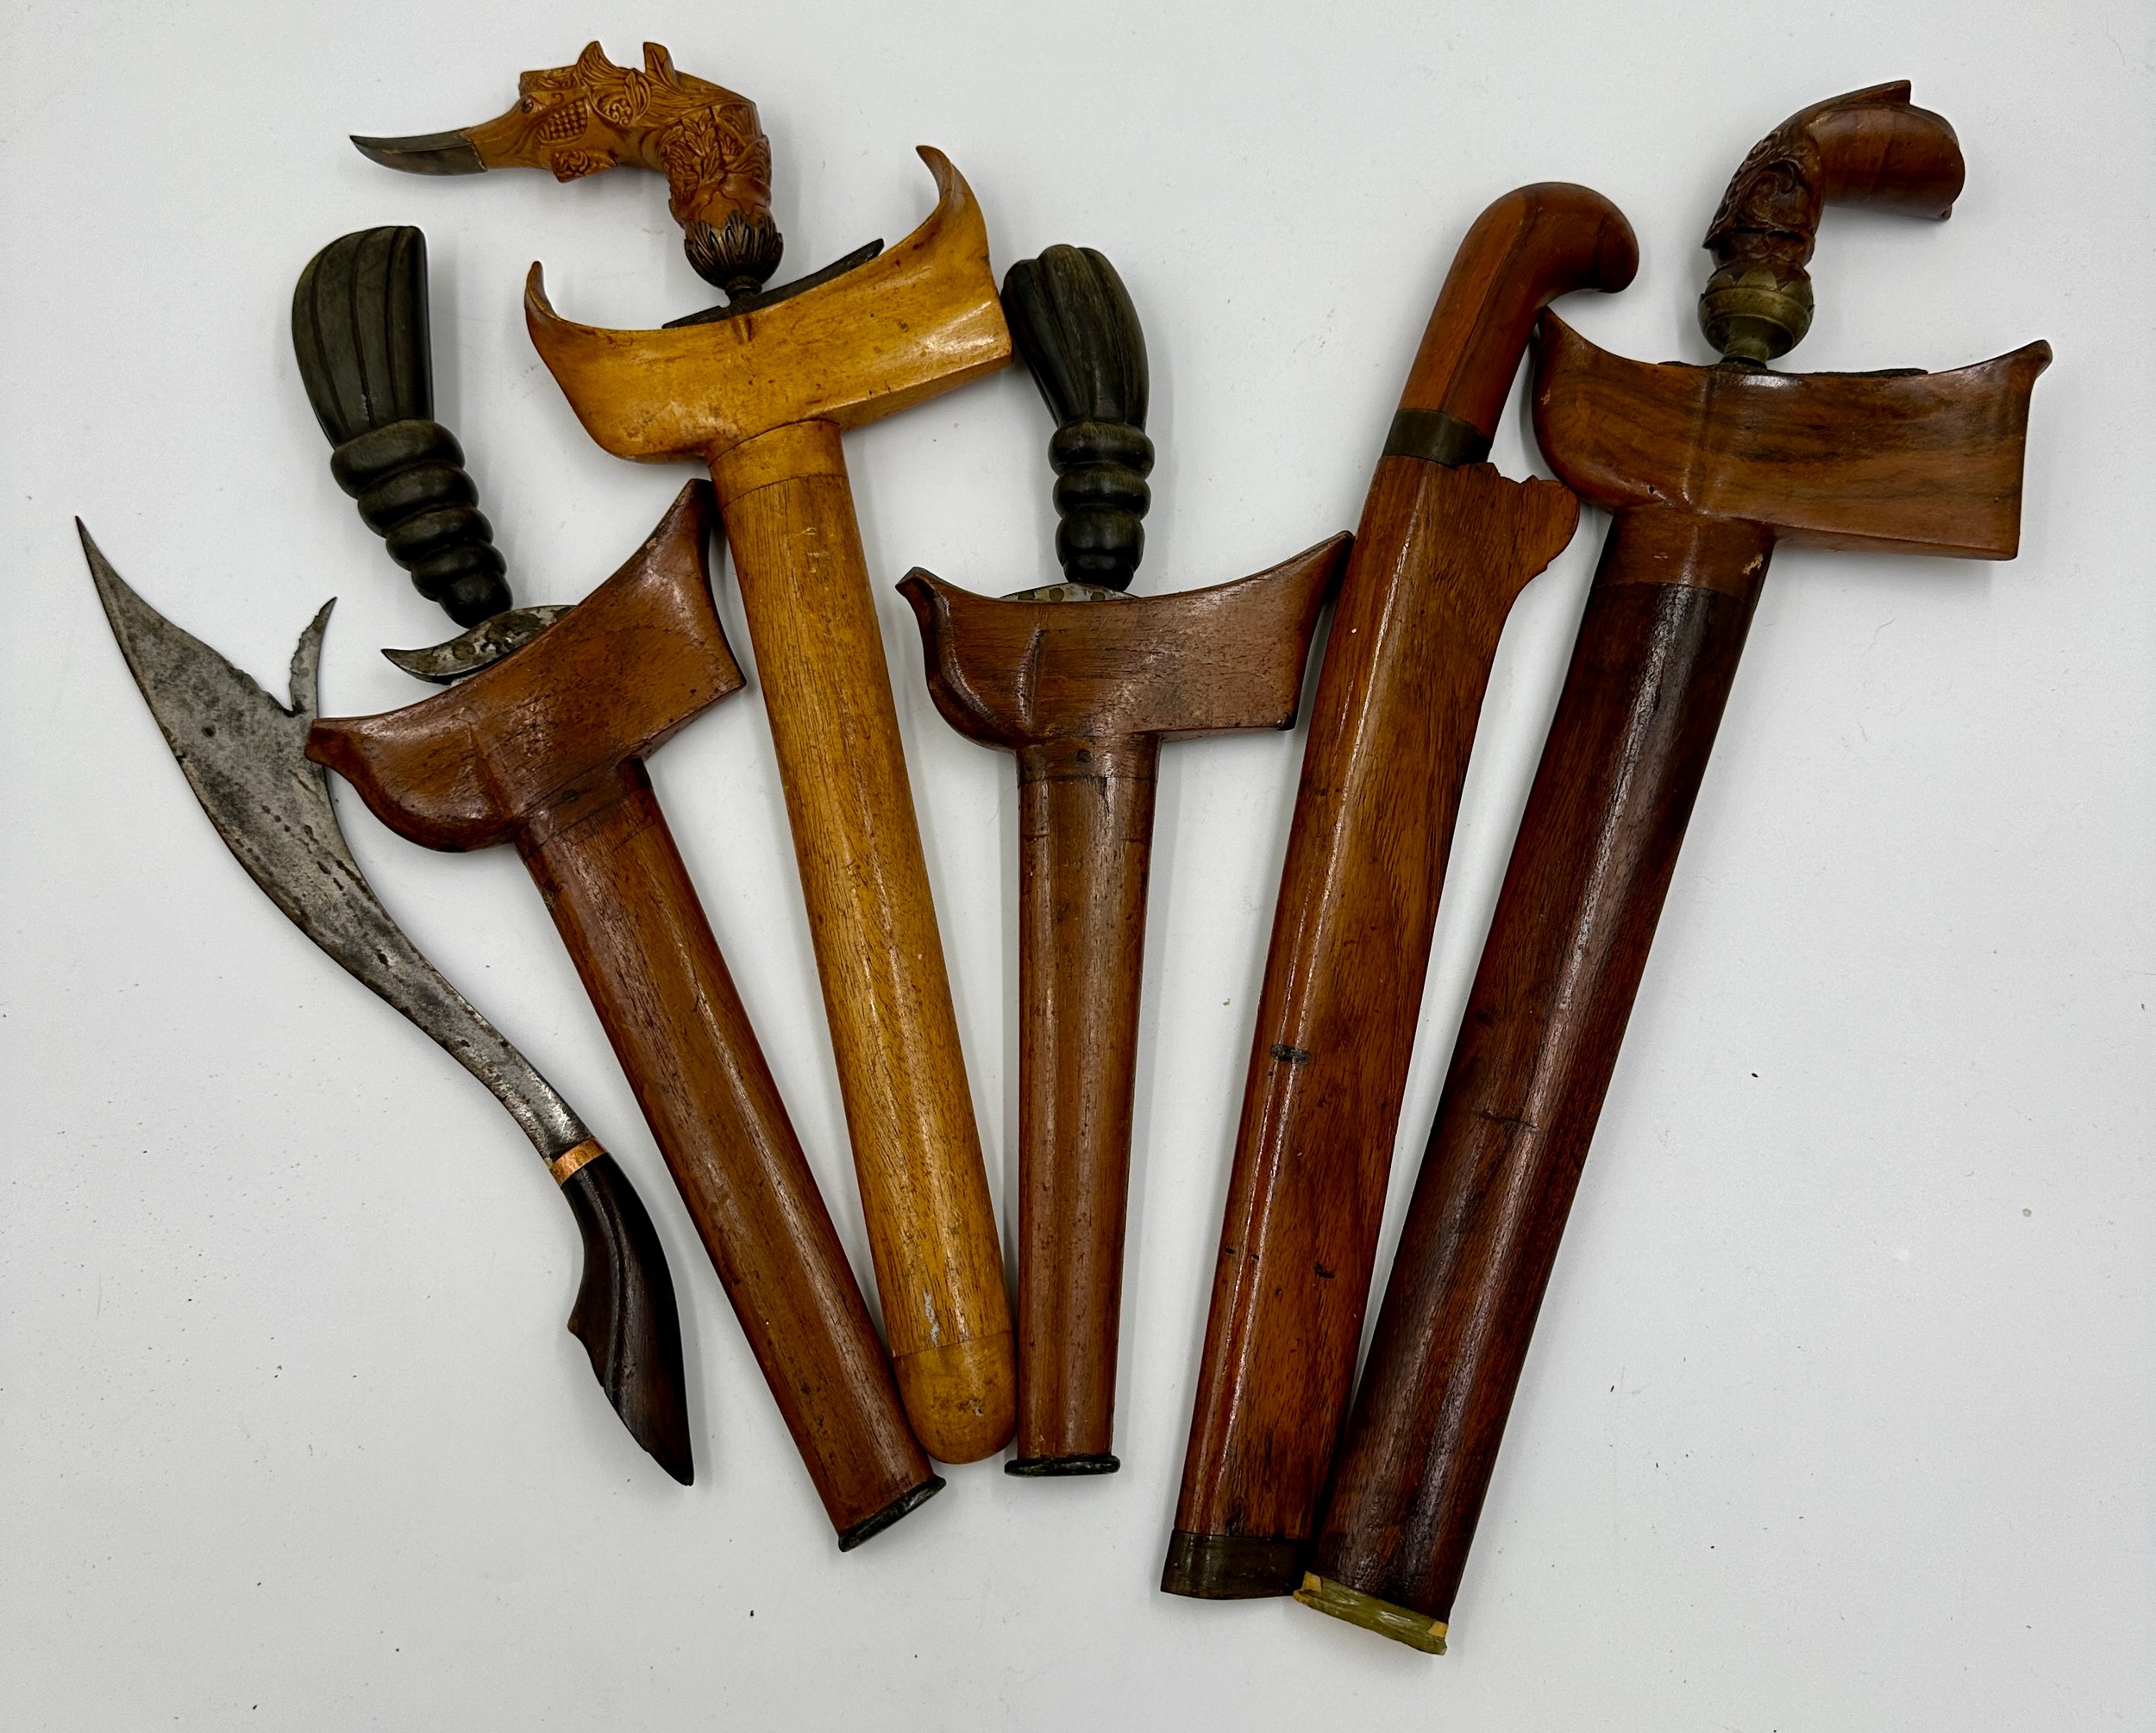 From the estate of Harry Gilbert Shorters M. B. E., A.M.N. Four Malaysian Kris daggers all with